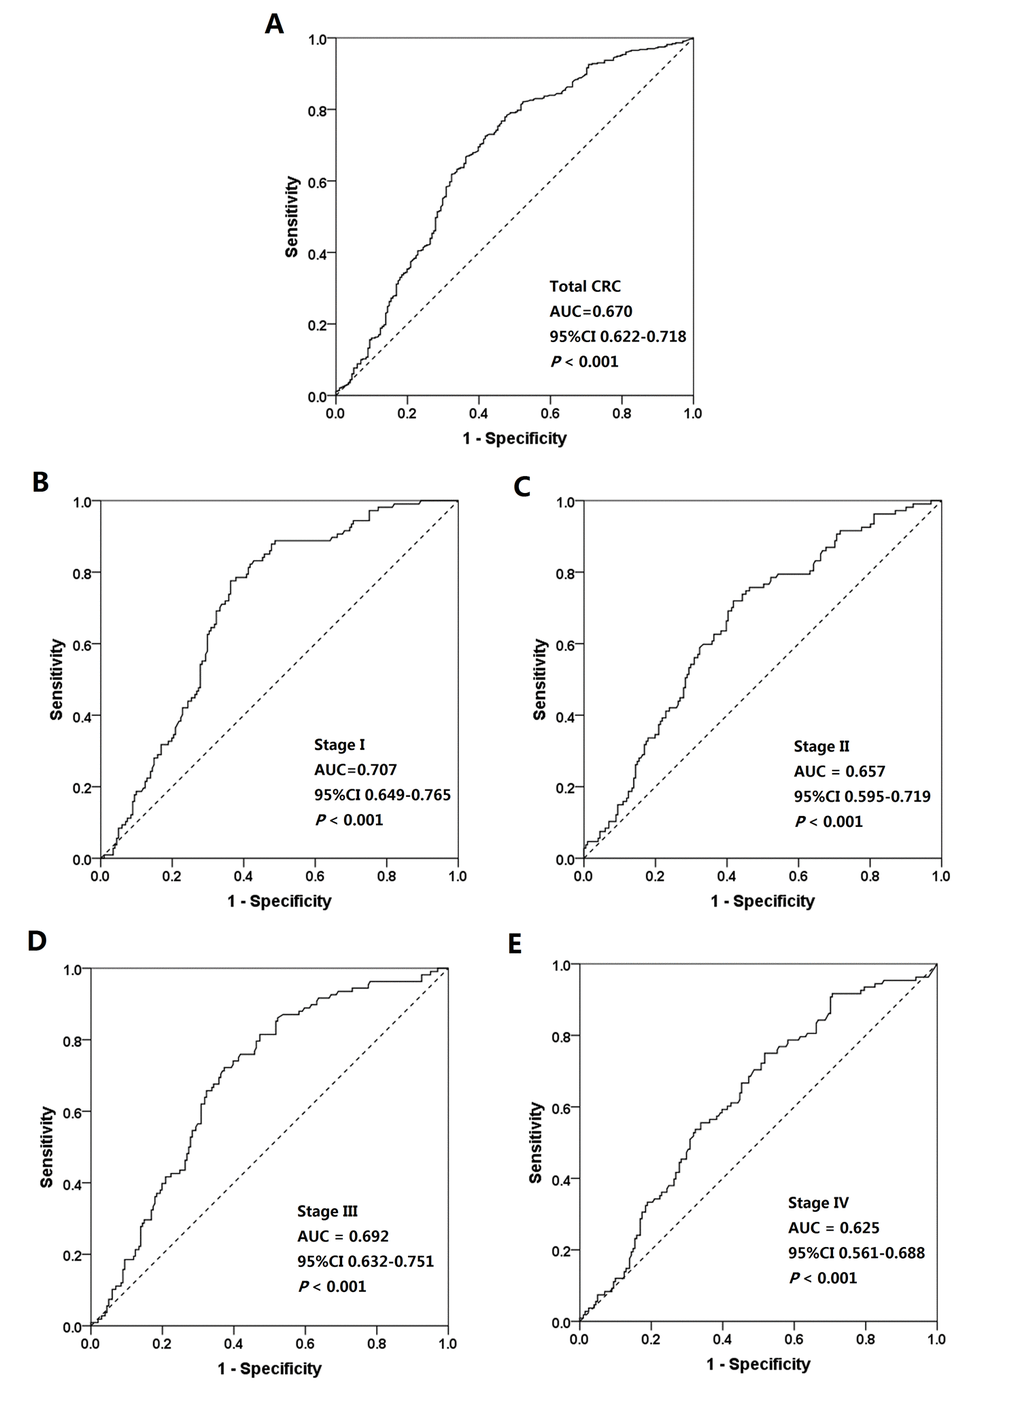 Receiver operating characteristic (ROC) curves for distinguishing colorectal cancer (CRC) patients from healthy controls. (A) ROC curves for all CRC patients and healthy controls. (B) ROC curves for stage I CRC patients and healthy controls. (C) ROC curves for stage II CRC patients and healthy controls, (D) ROC curves for stage III CRC patients and healthy controls. (E) ROC curves for stage IV CRC patients and healthy controls.